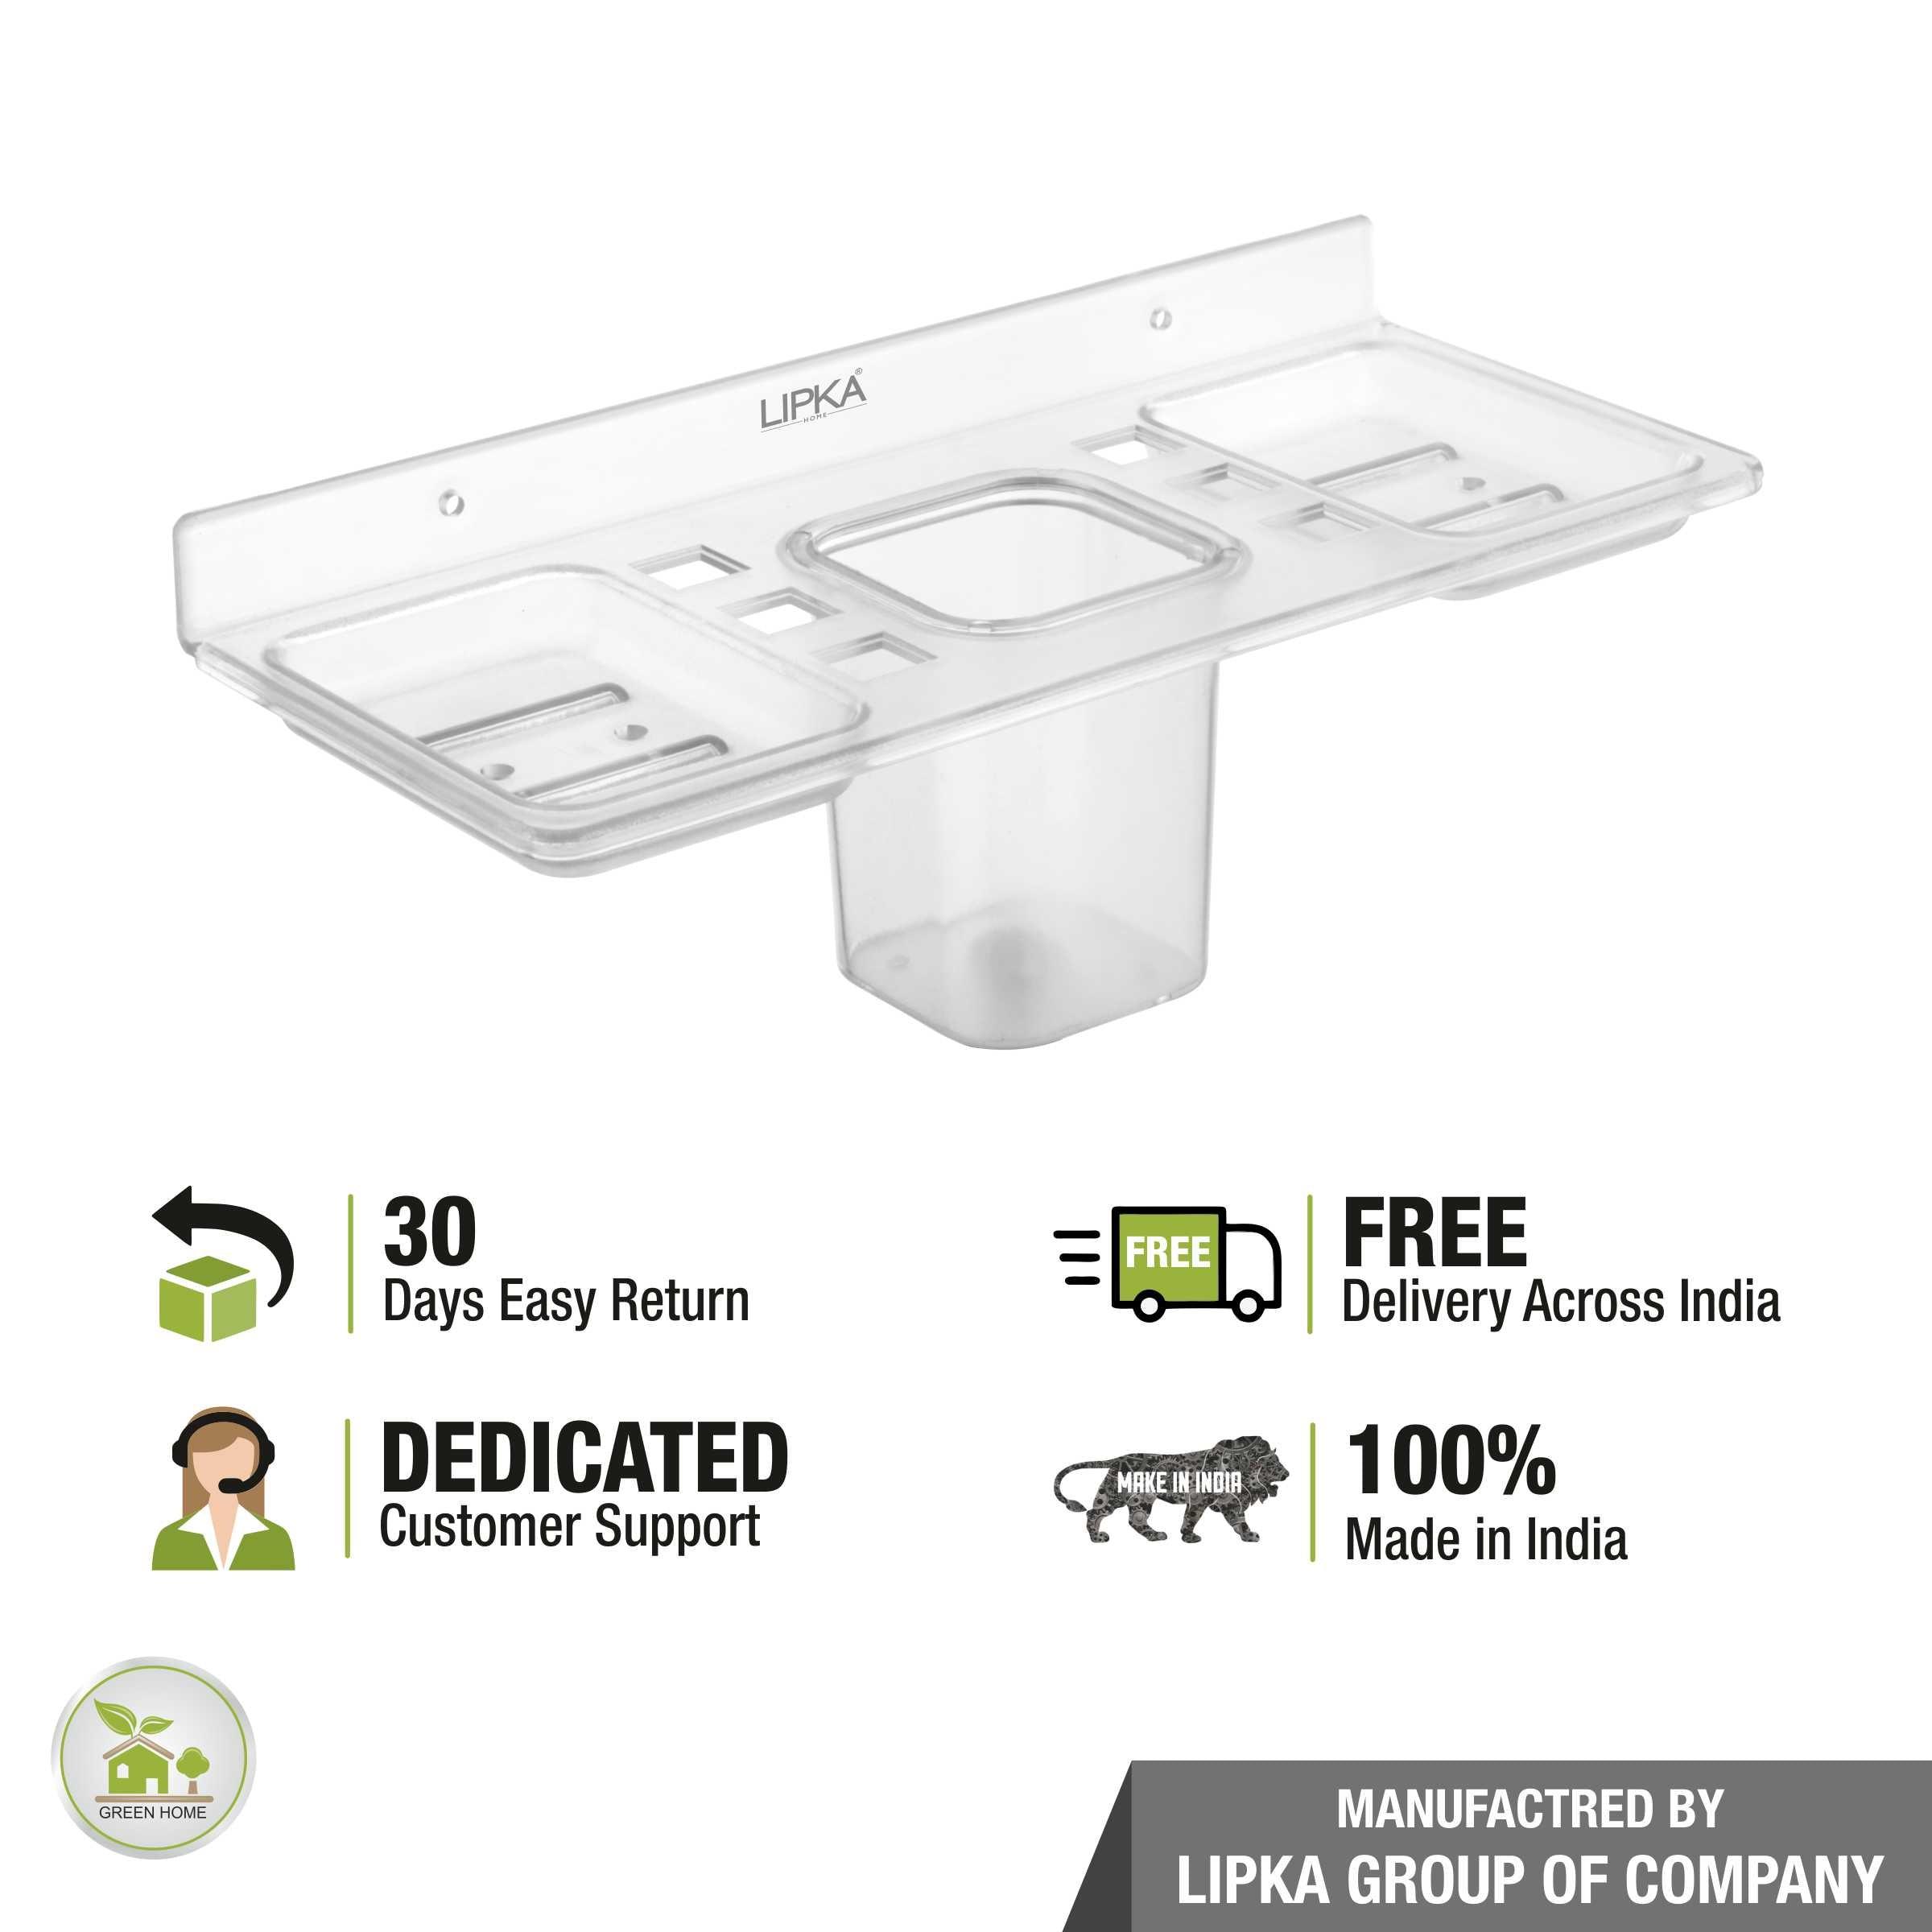 4-in-1 Shelf Tray (Tumbler, Toothbrush Holder & 2 Soap Dishes ) free delivery